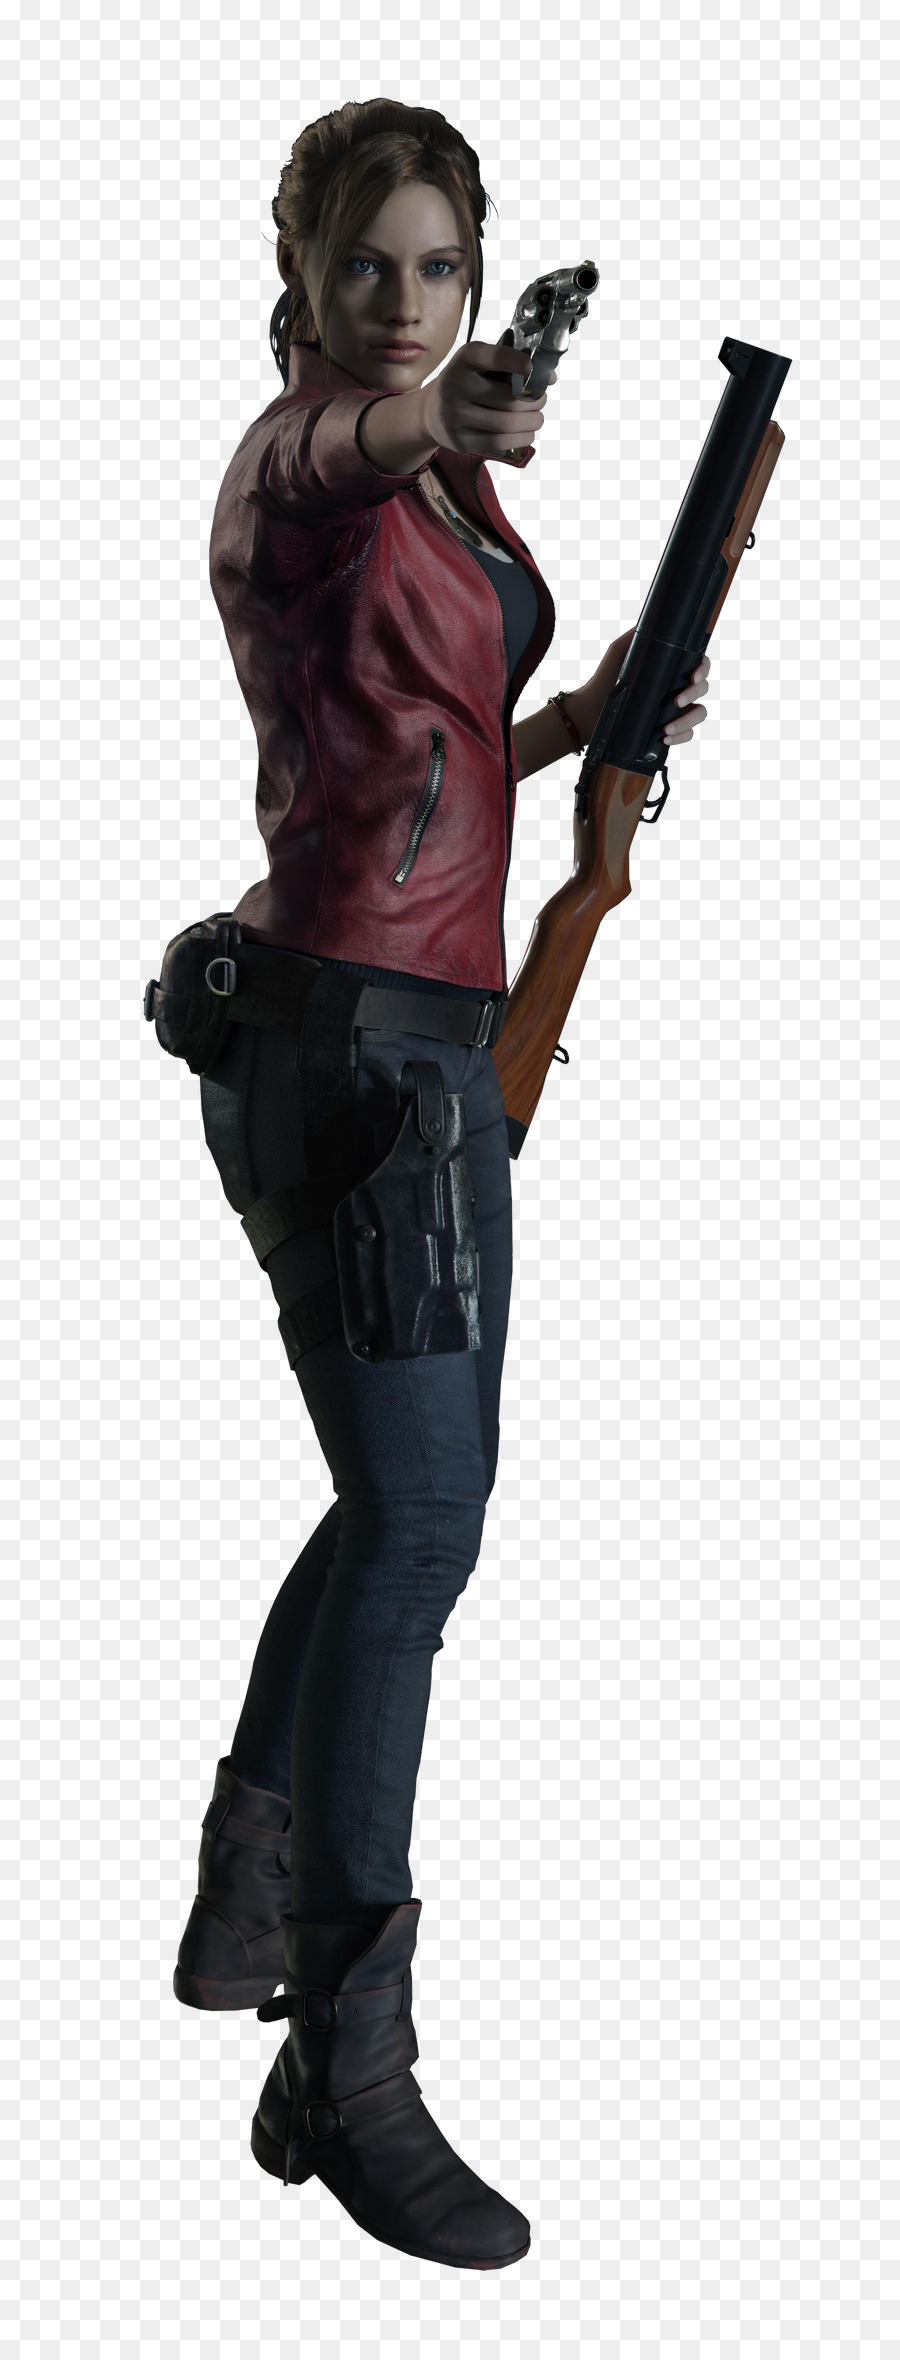 Resident Evil 2 Claire Redfield Leon S. Kennedy Resident Evil: Offenbarungen - erstes Frost-Png-Resident-Übel